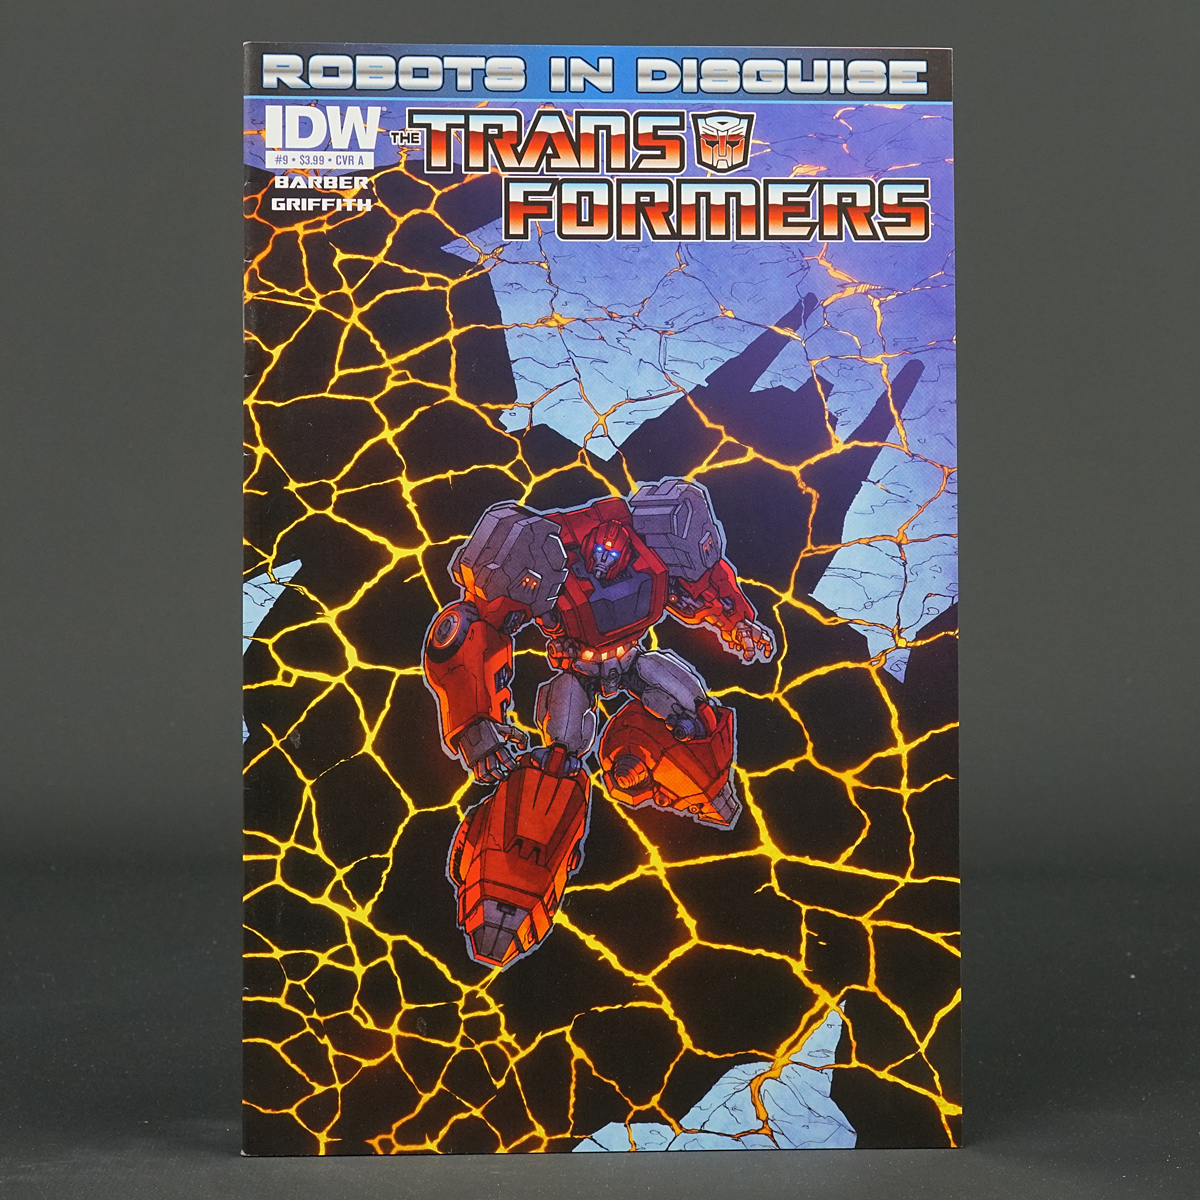 Transformers ROBOTS IN DISGUISE #9 Cvr A IDW Comics 2012 9A (CA)Griffith 220709A